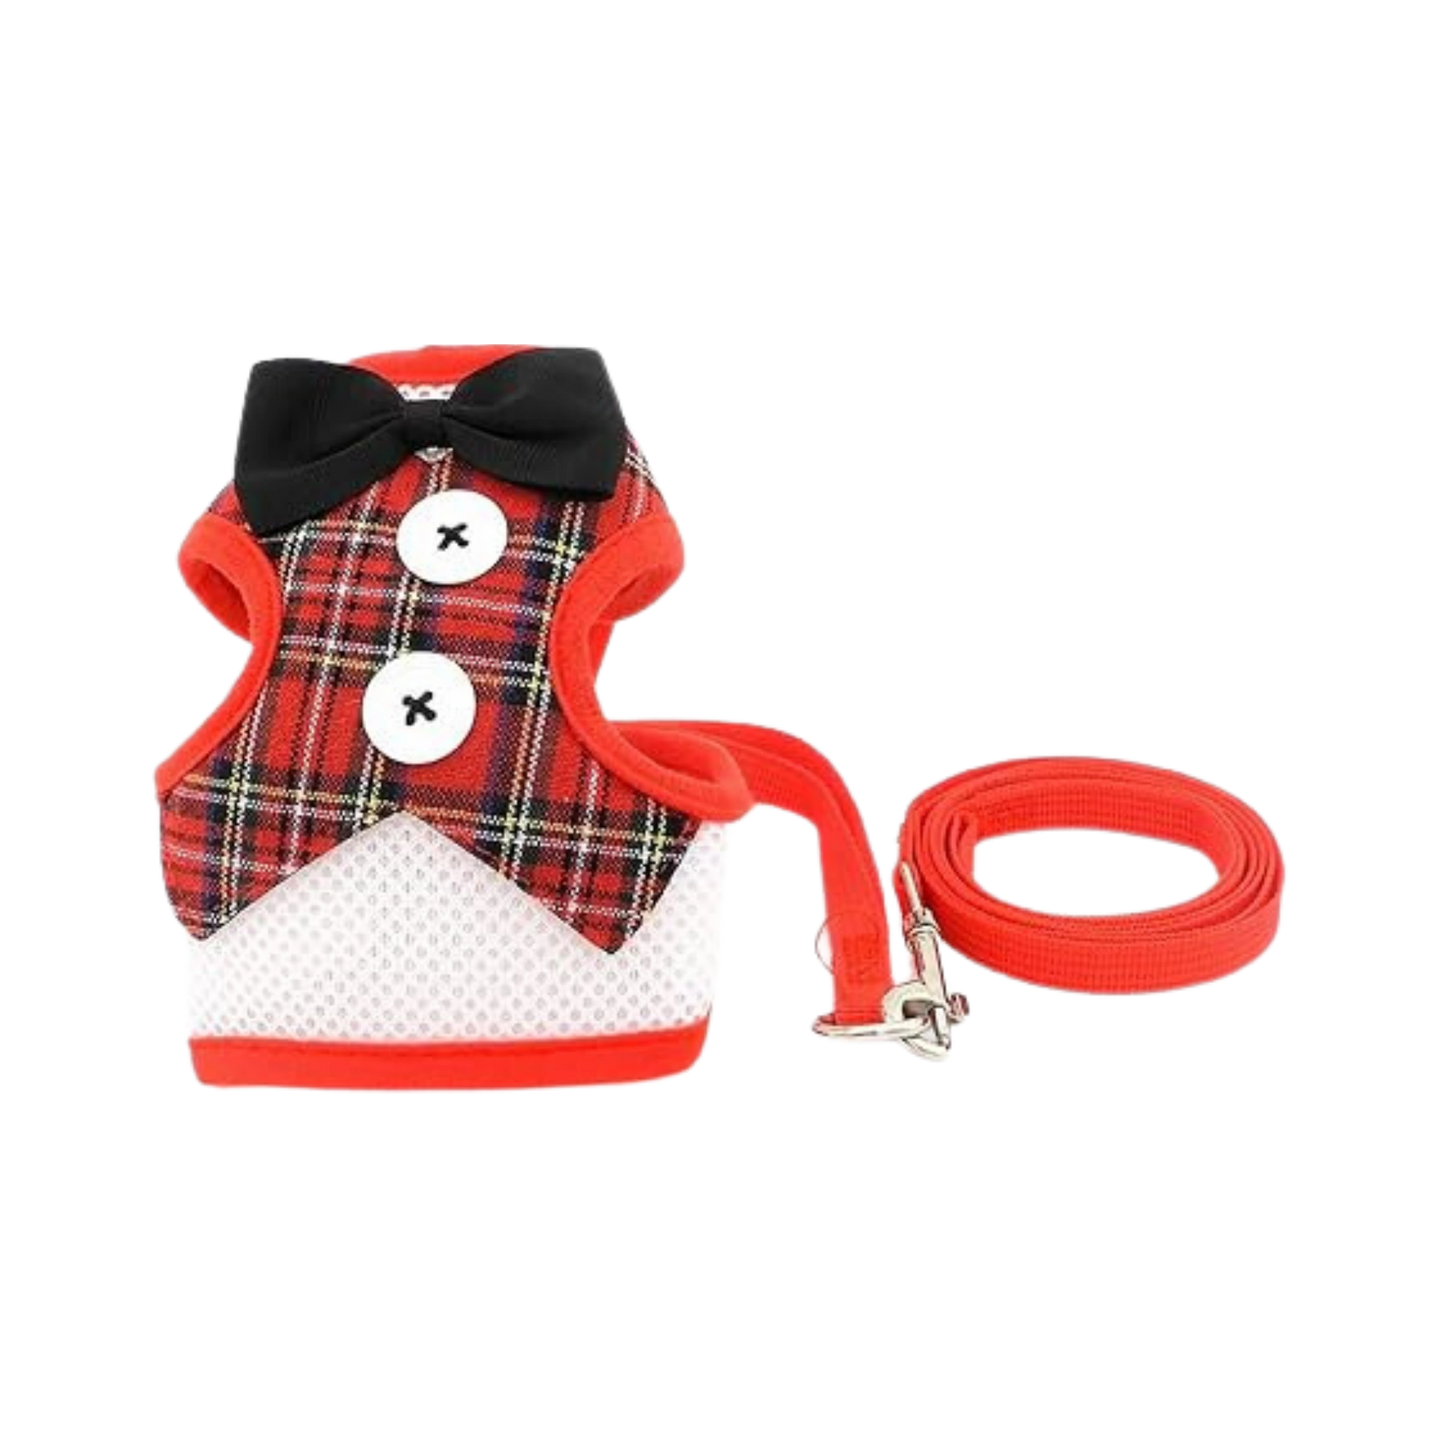 WW TOYBREED TUXIDO HARNESS WITH LEASH RED CHECKS (M) MEDIUM